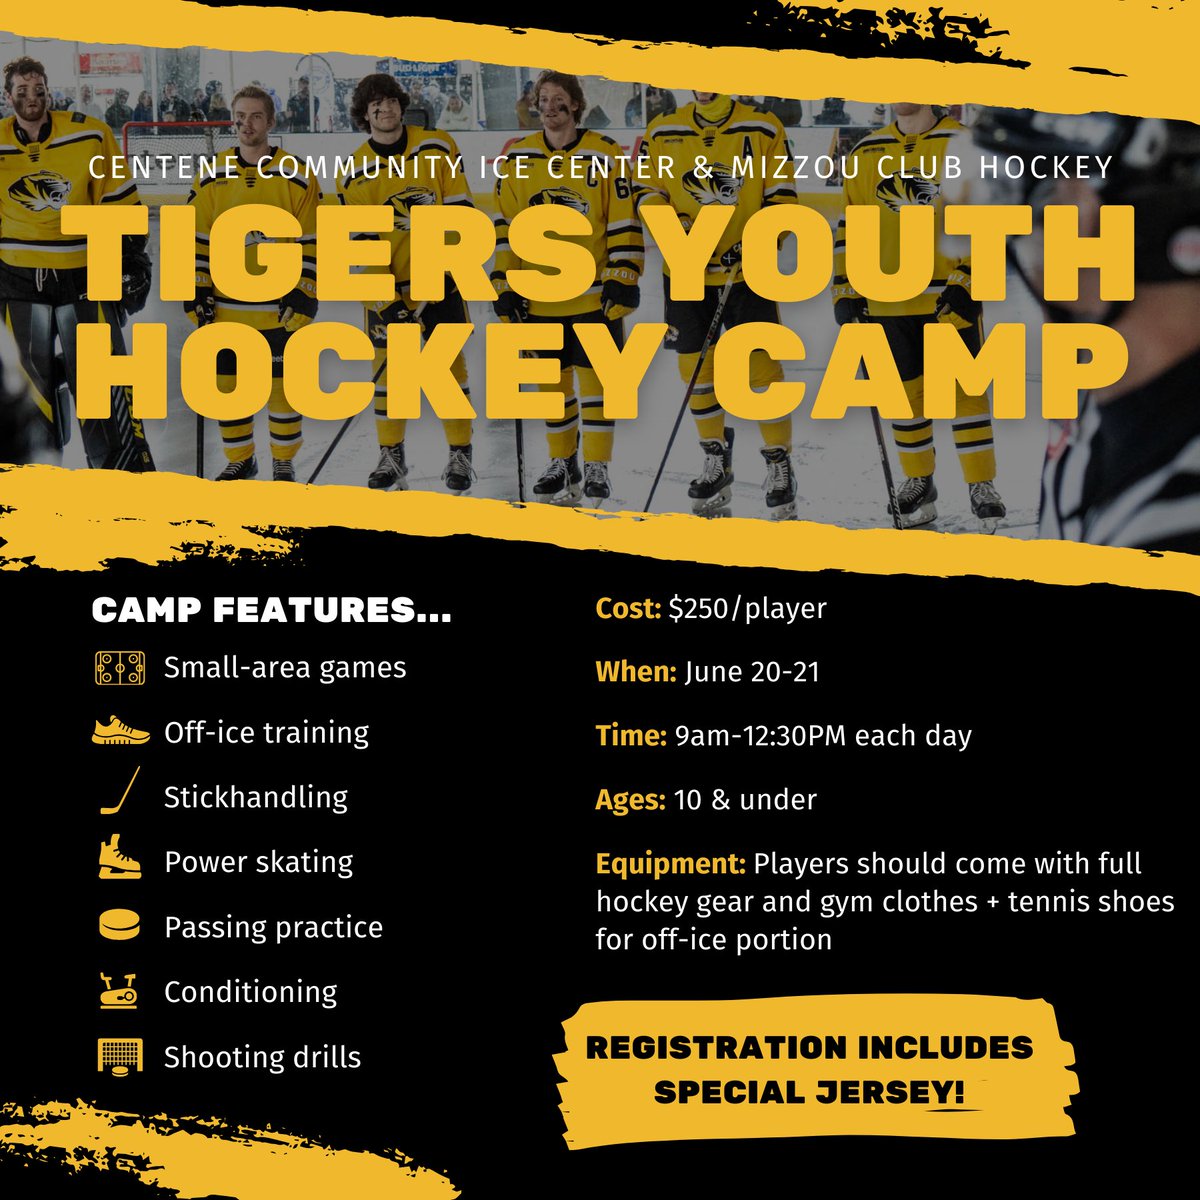 Centene Community Ice Center🤝@MizClubHockey Spots in the Tigers Youth Hockey Camp are filling fast! Enroll your youth player now so they can partake in drills alongside players from the Mizzou Club Hockey team. Registration: bit.ly/MUYTHCMP